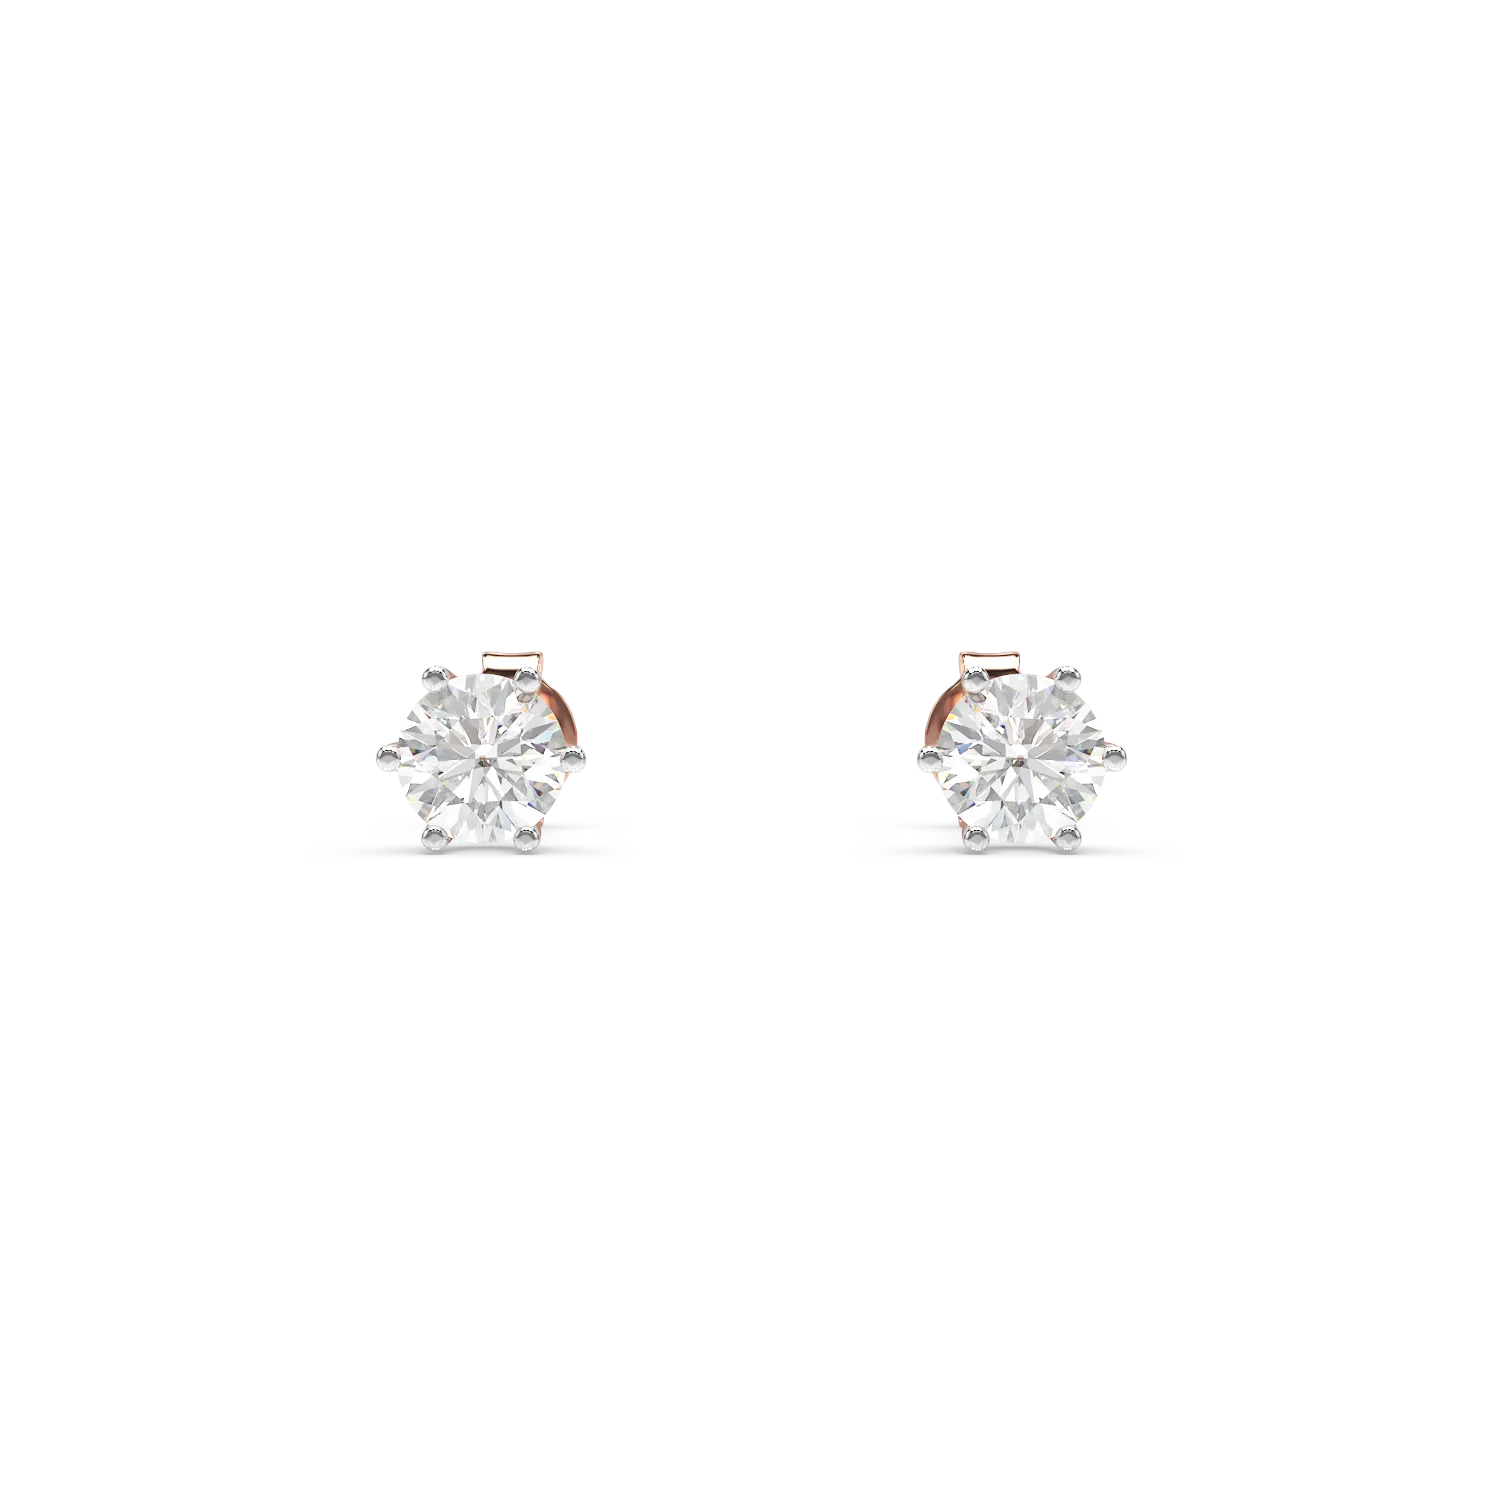 Rose gold earrings with 0.4ct solitaire diamonds